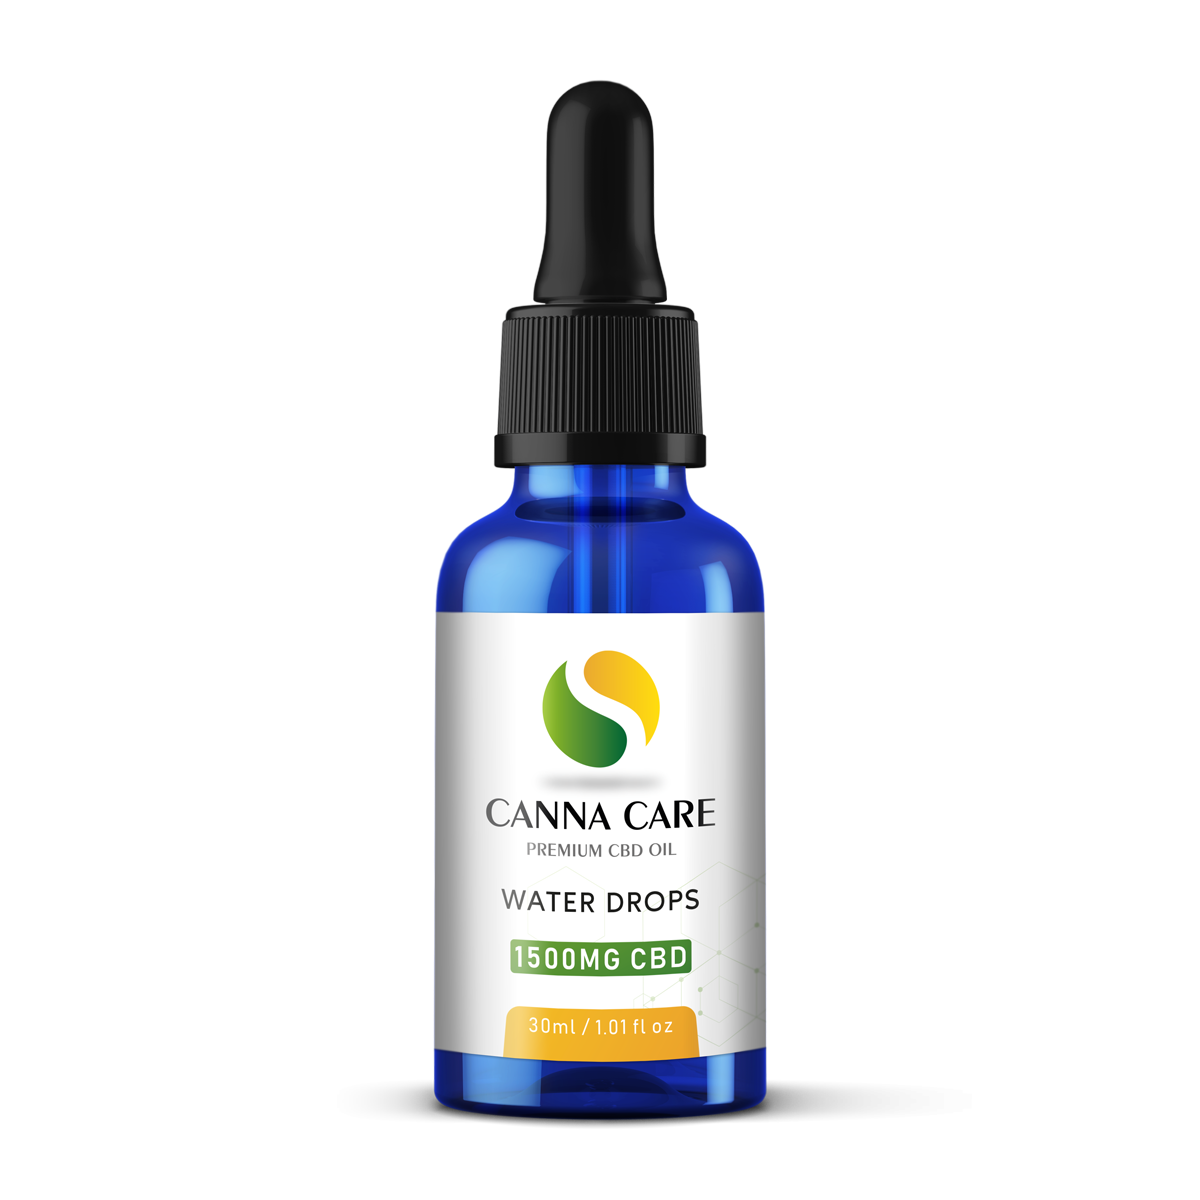 https://cannacare.gi/wp-content/uploads/2021/07/Water-Drops-1500mg-30ml.png